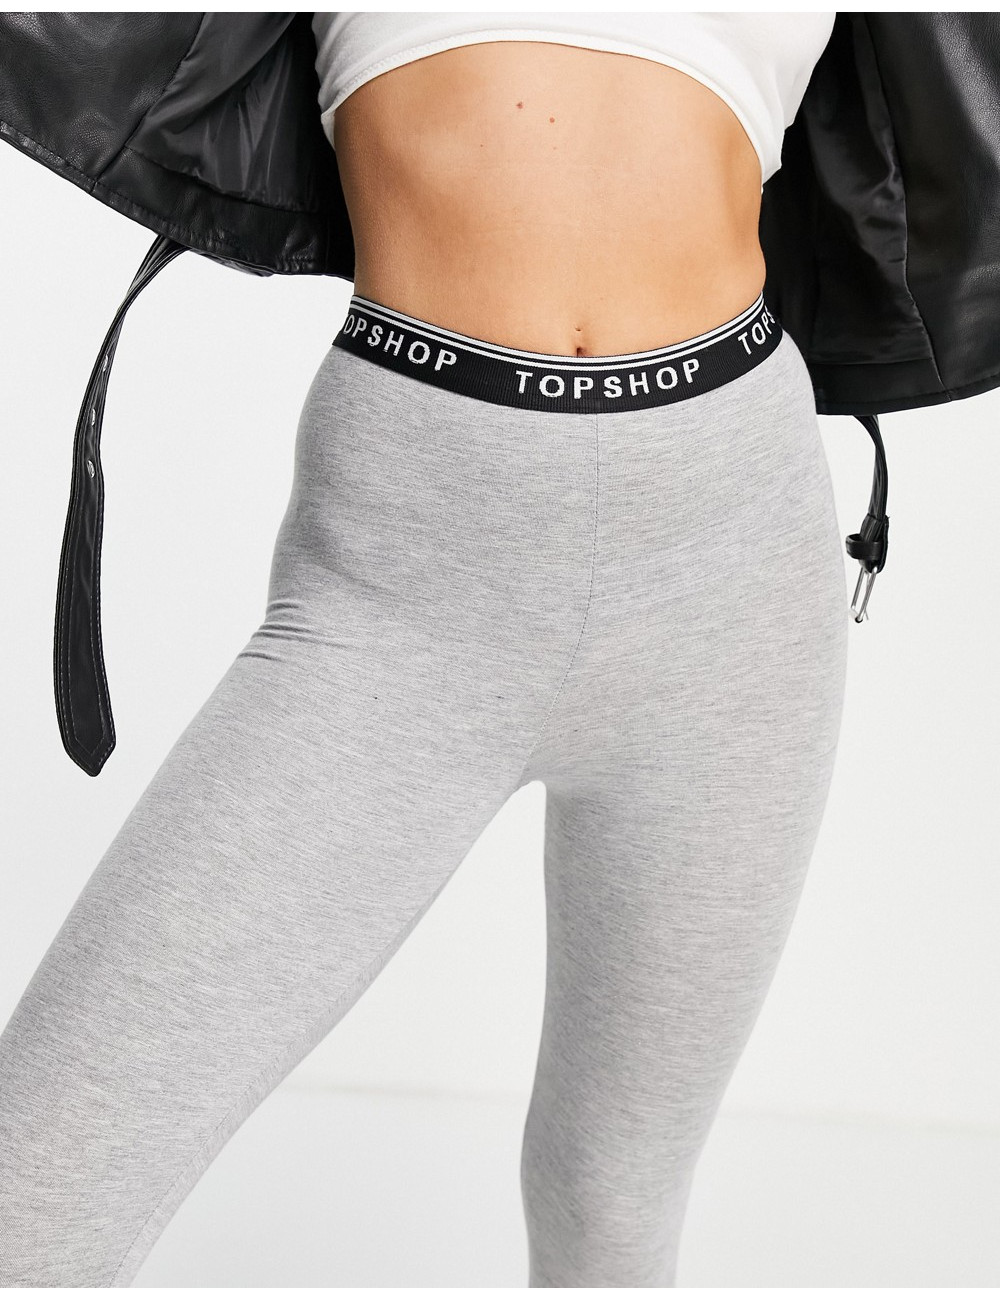 Topshop branded waistband...